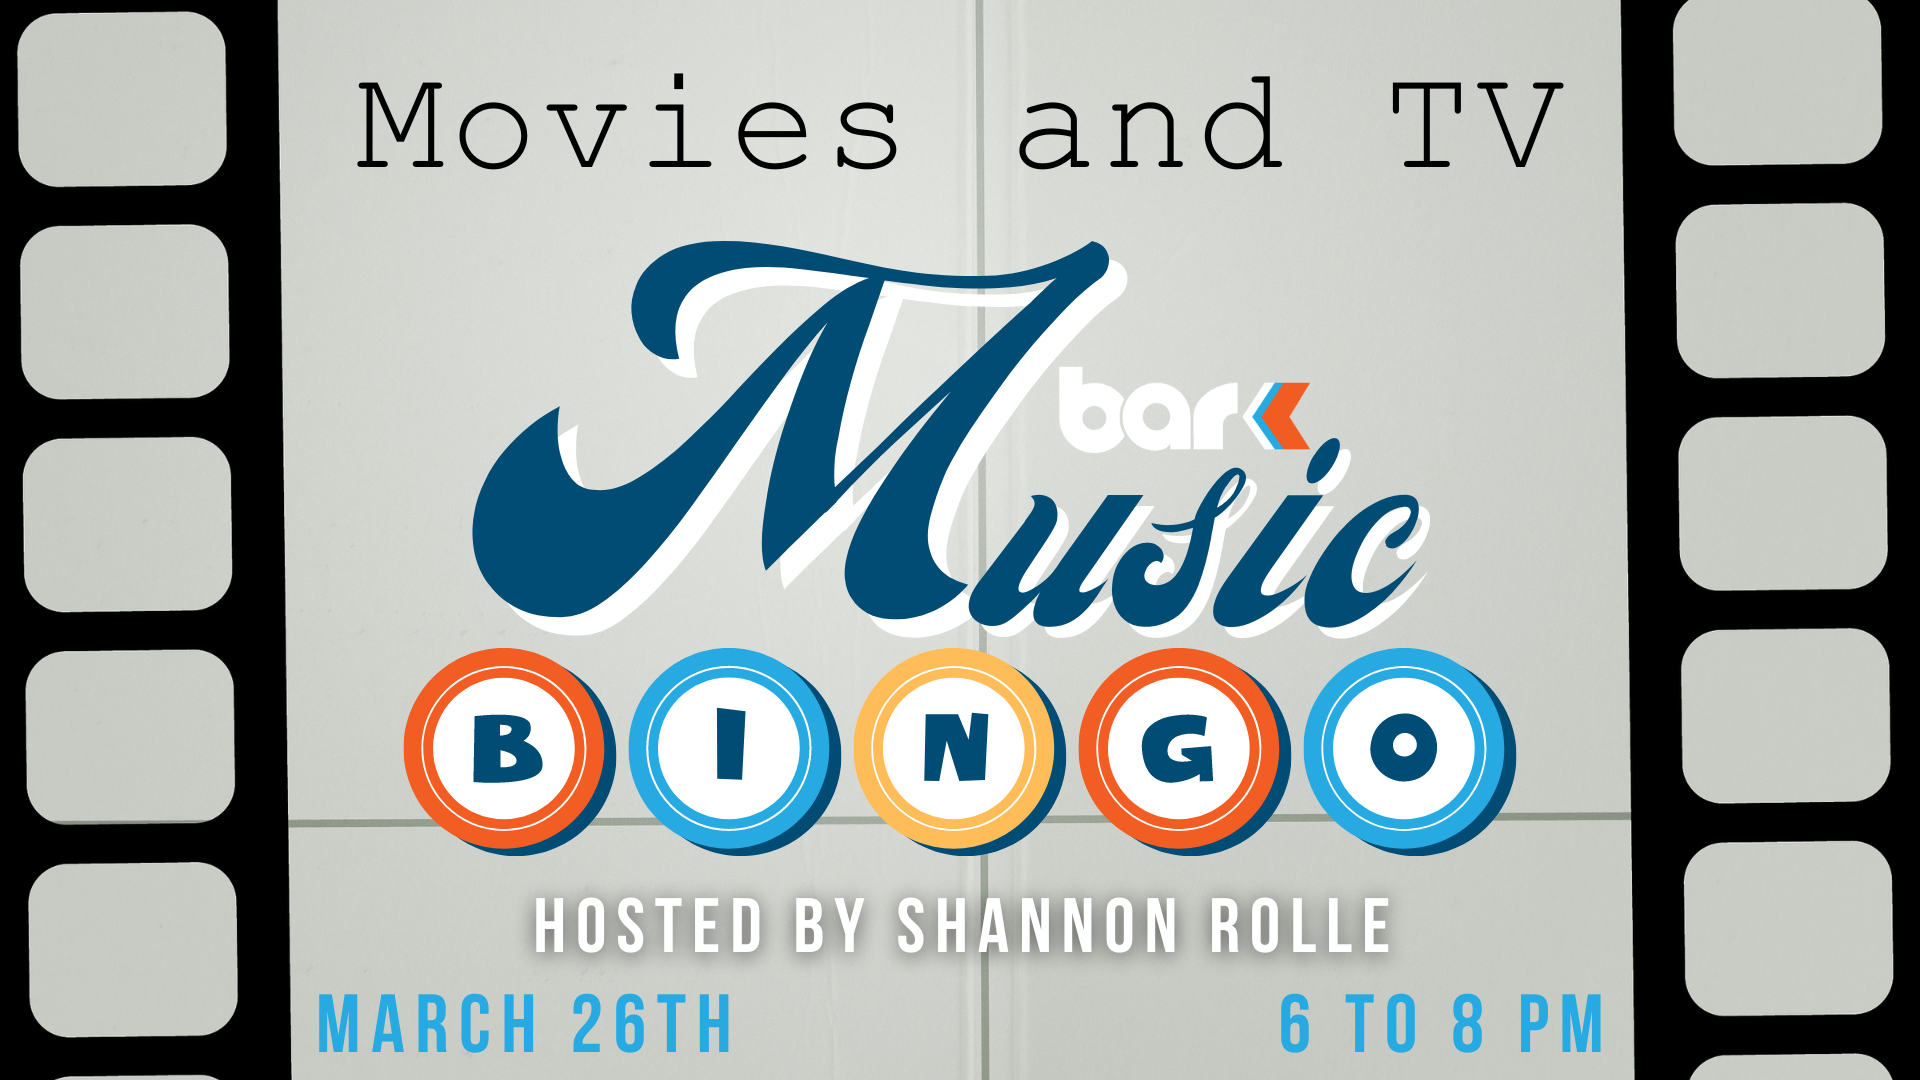 Movies and TV music bingo at Bar K hosted by Shannon Rolle. March 26th from 6 to 8 pm.